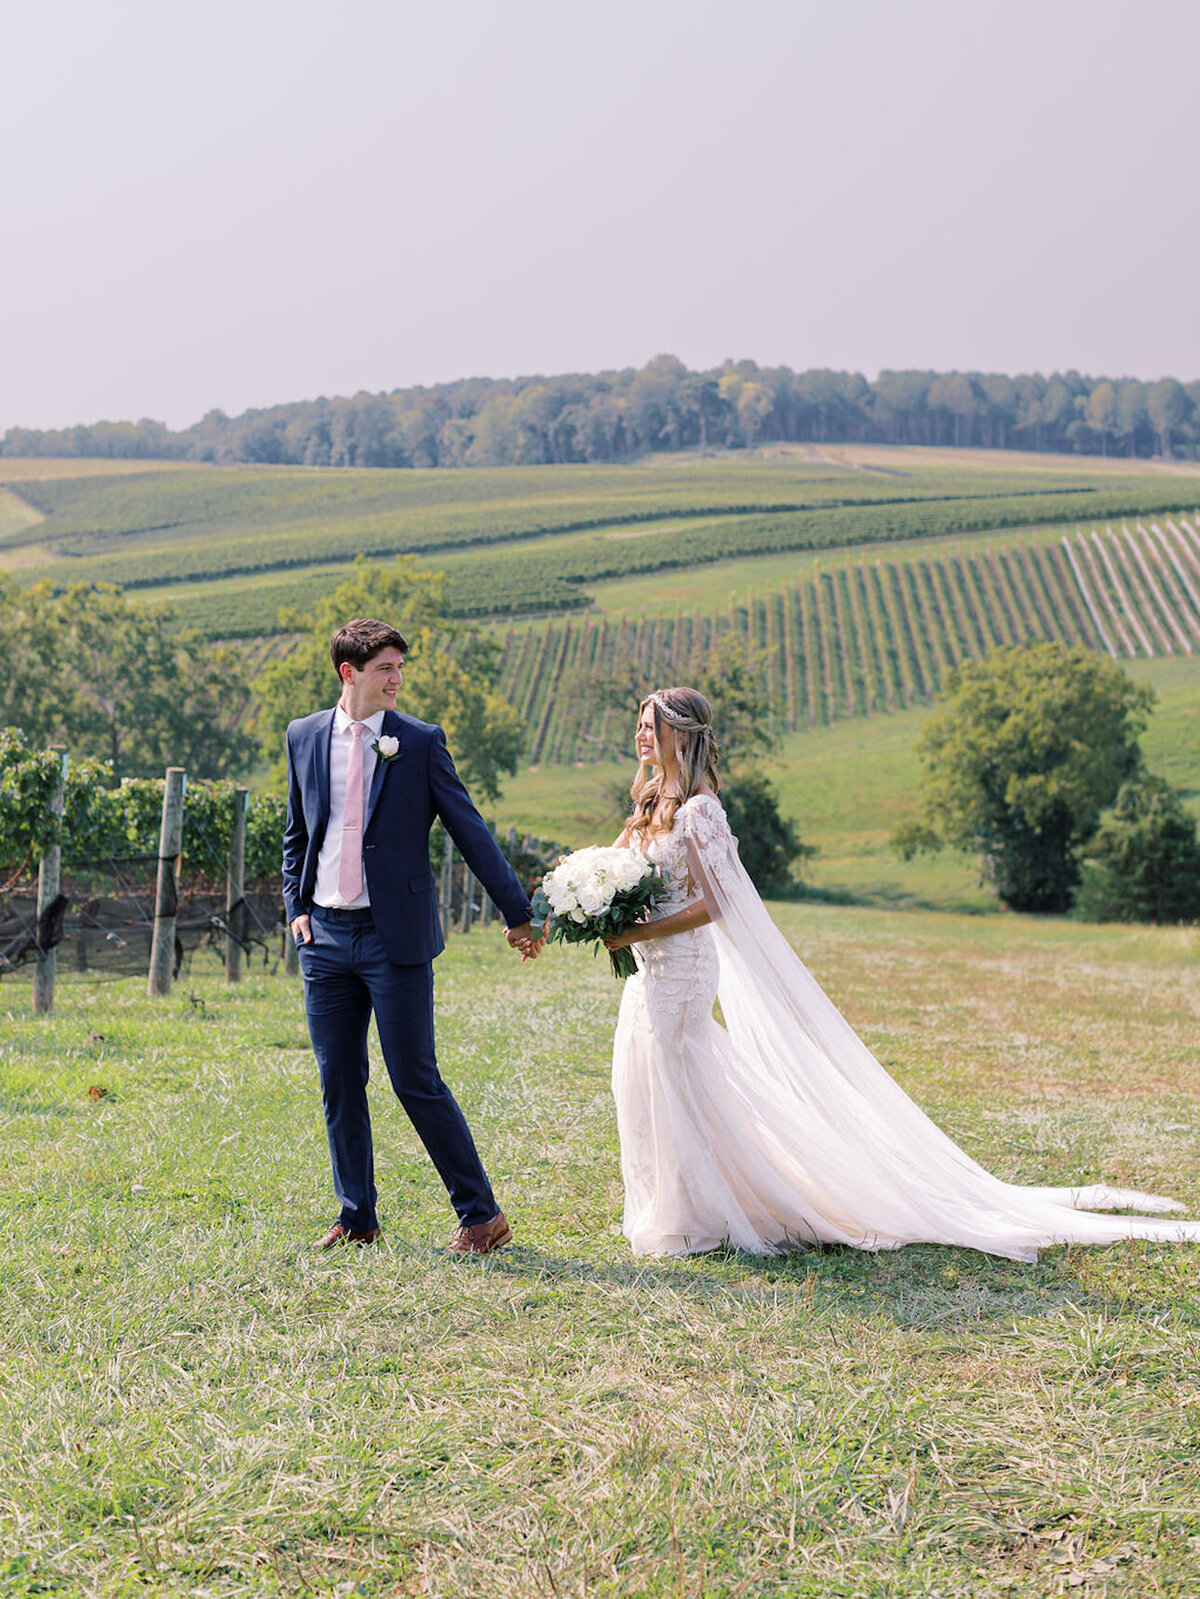 Megan-Brandon-Stone-Tower-Winery-Wedding-The-finer-points-event-planning-Kir2ben-photography00021